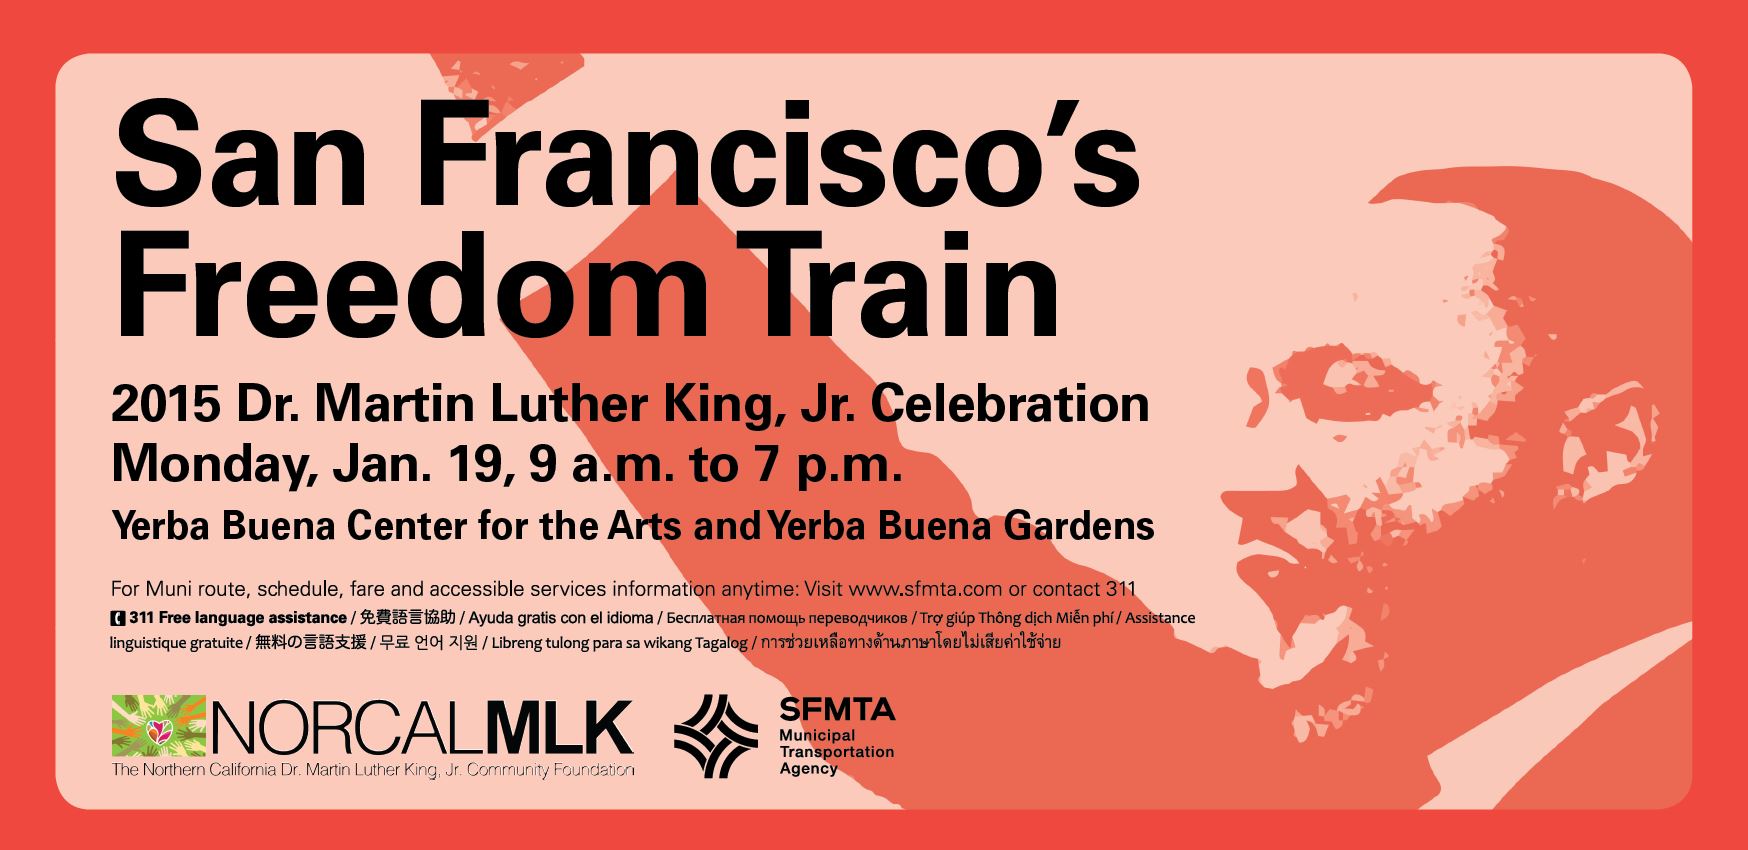 Graphic of MLK celebration poster with profile of Dr. King and event details.